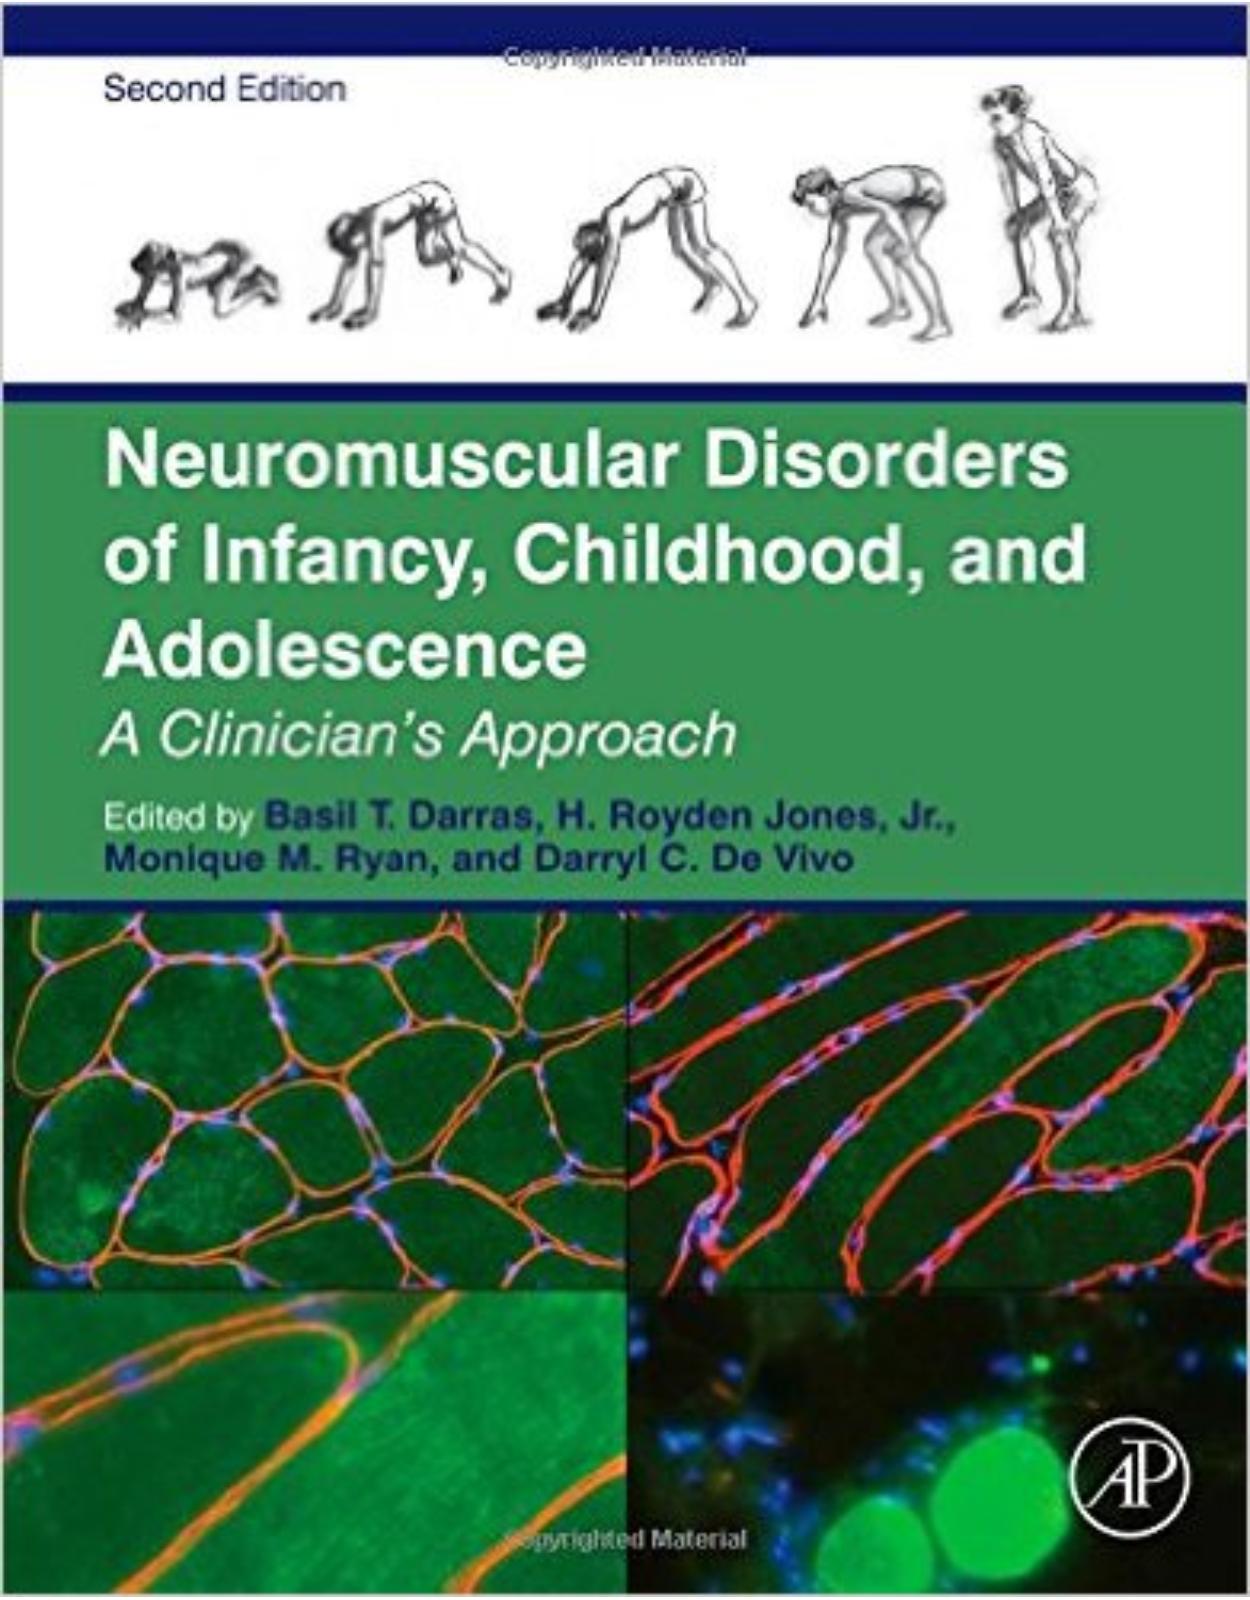 Neuromuscular Disorders of Infancy, Childhood, and Adolescence, Second Edition: A Clinician's Approach 2nd Edition